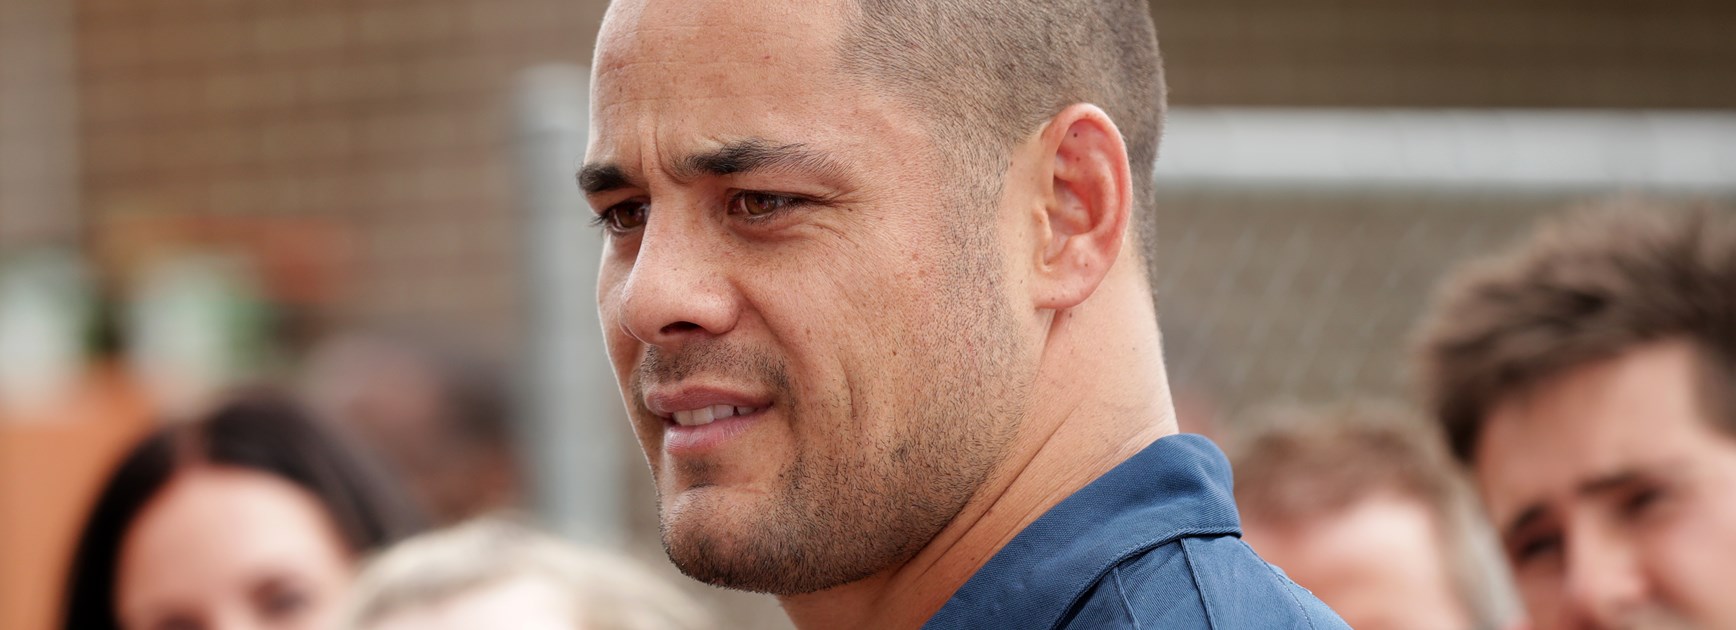 Jarryd Hayne vehemently denied the sexual assault allegations to the media.